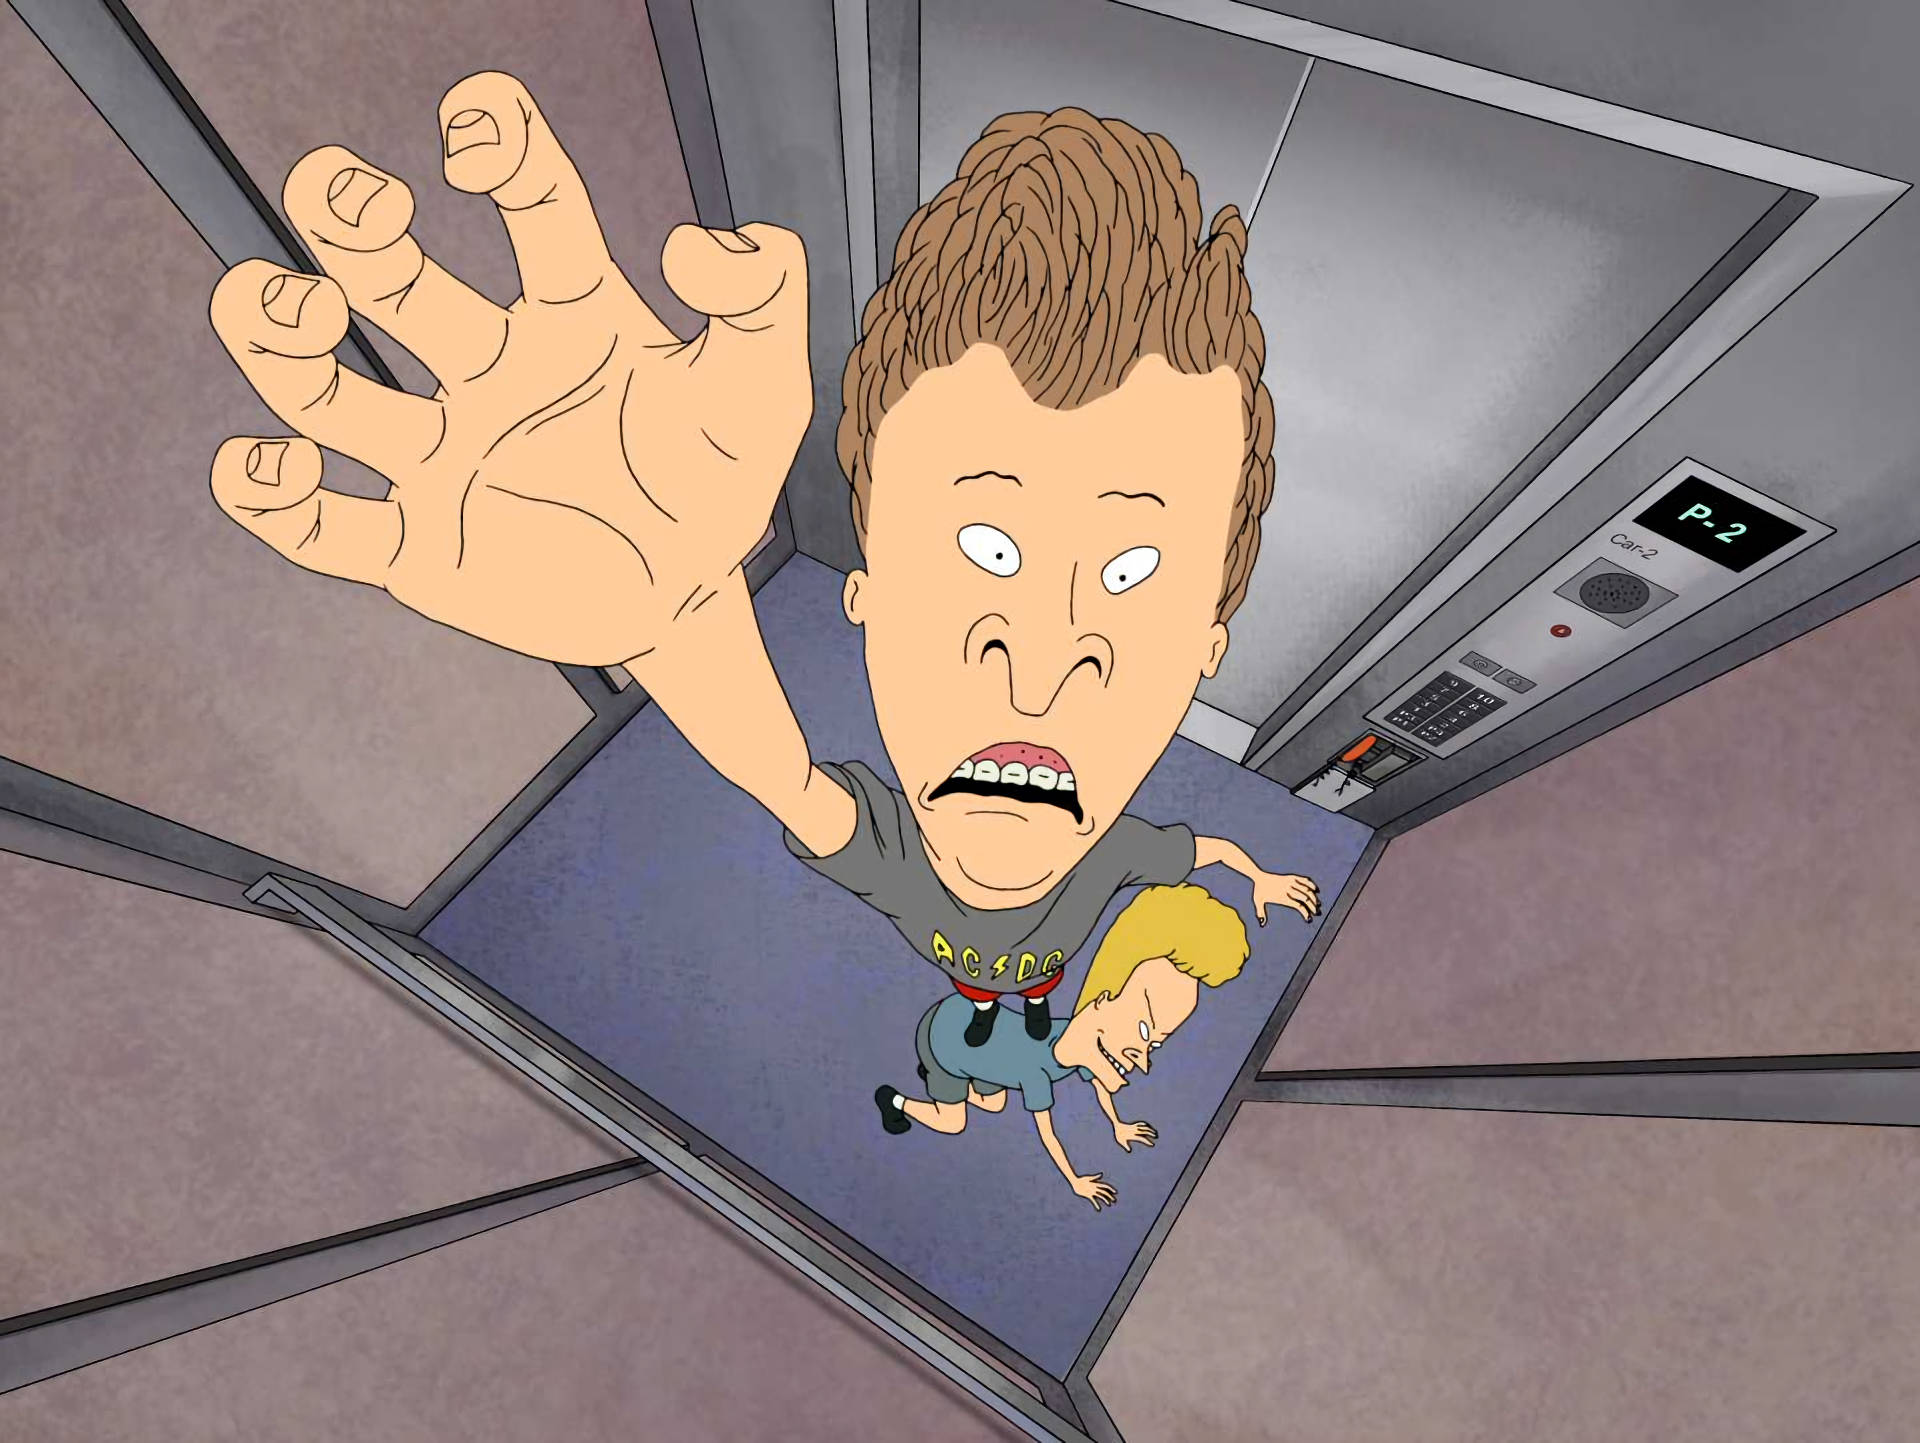 Caption: Beavis And Butt-head Riding In An Elevator